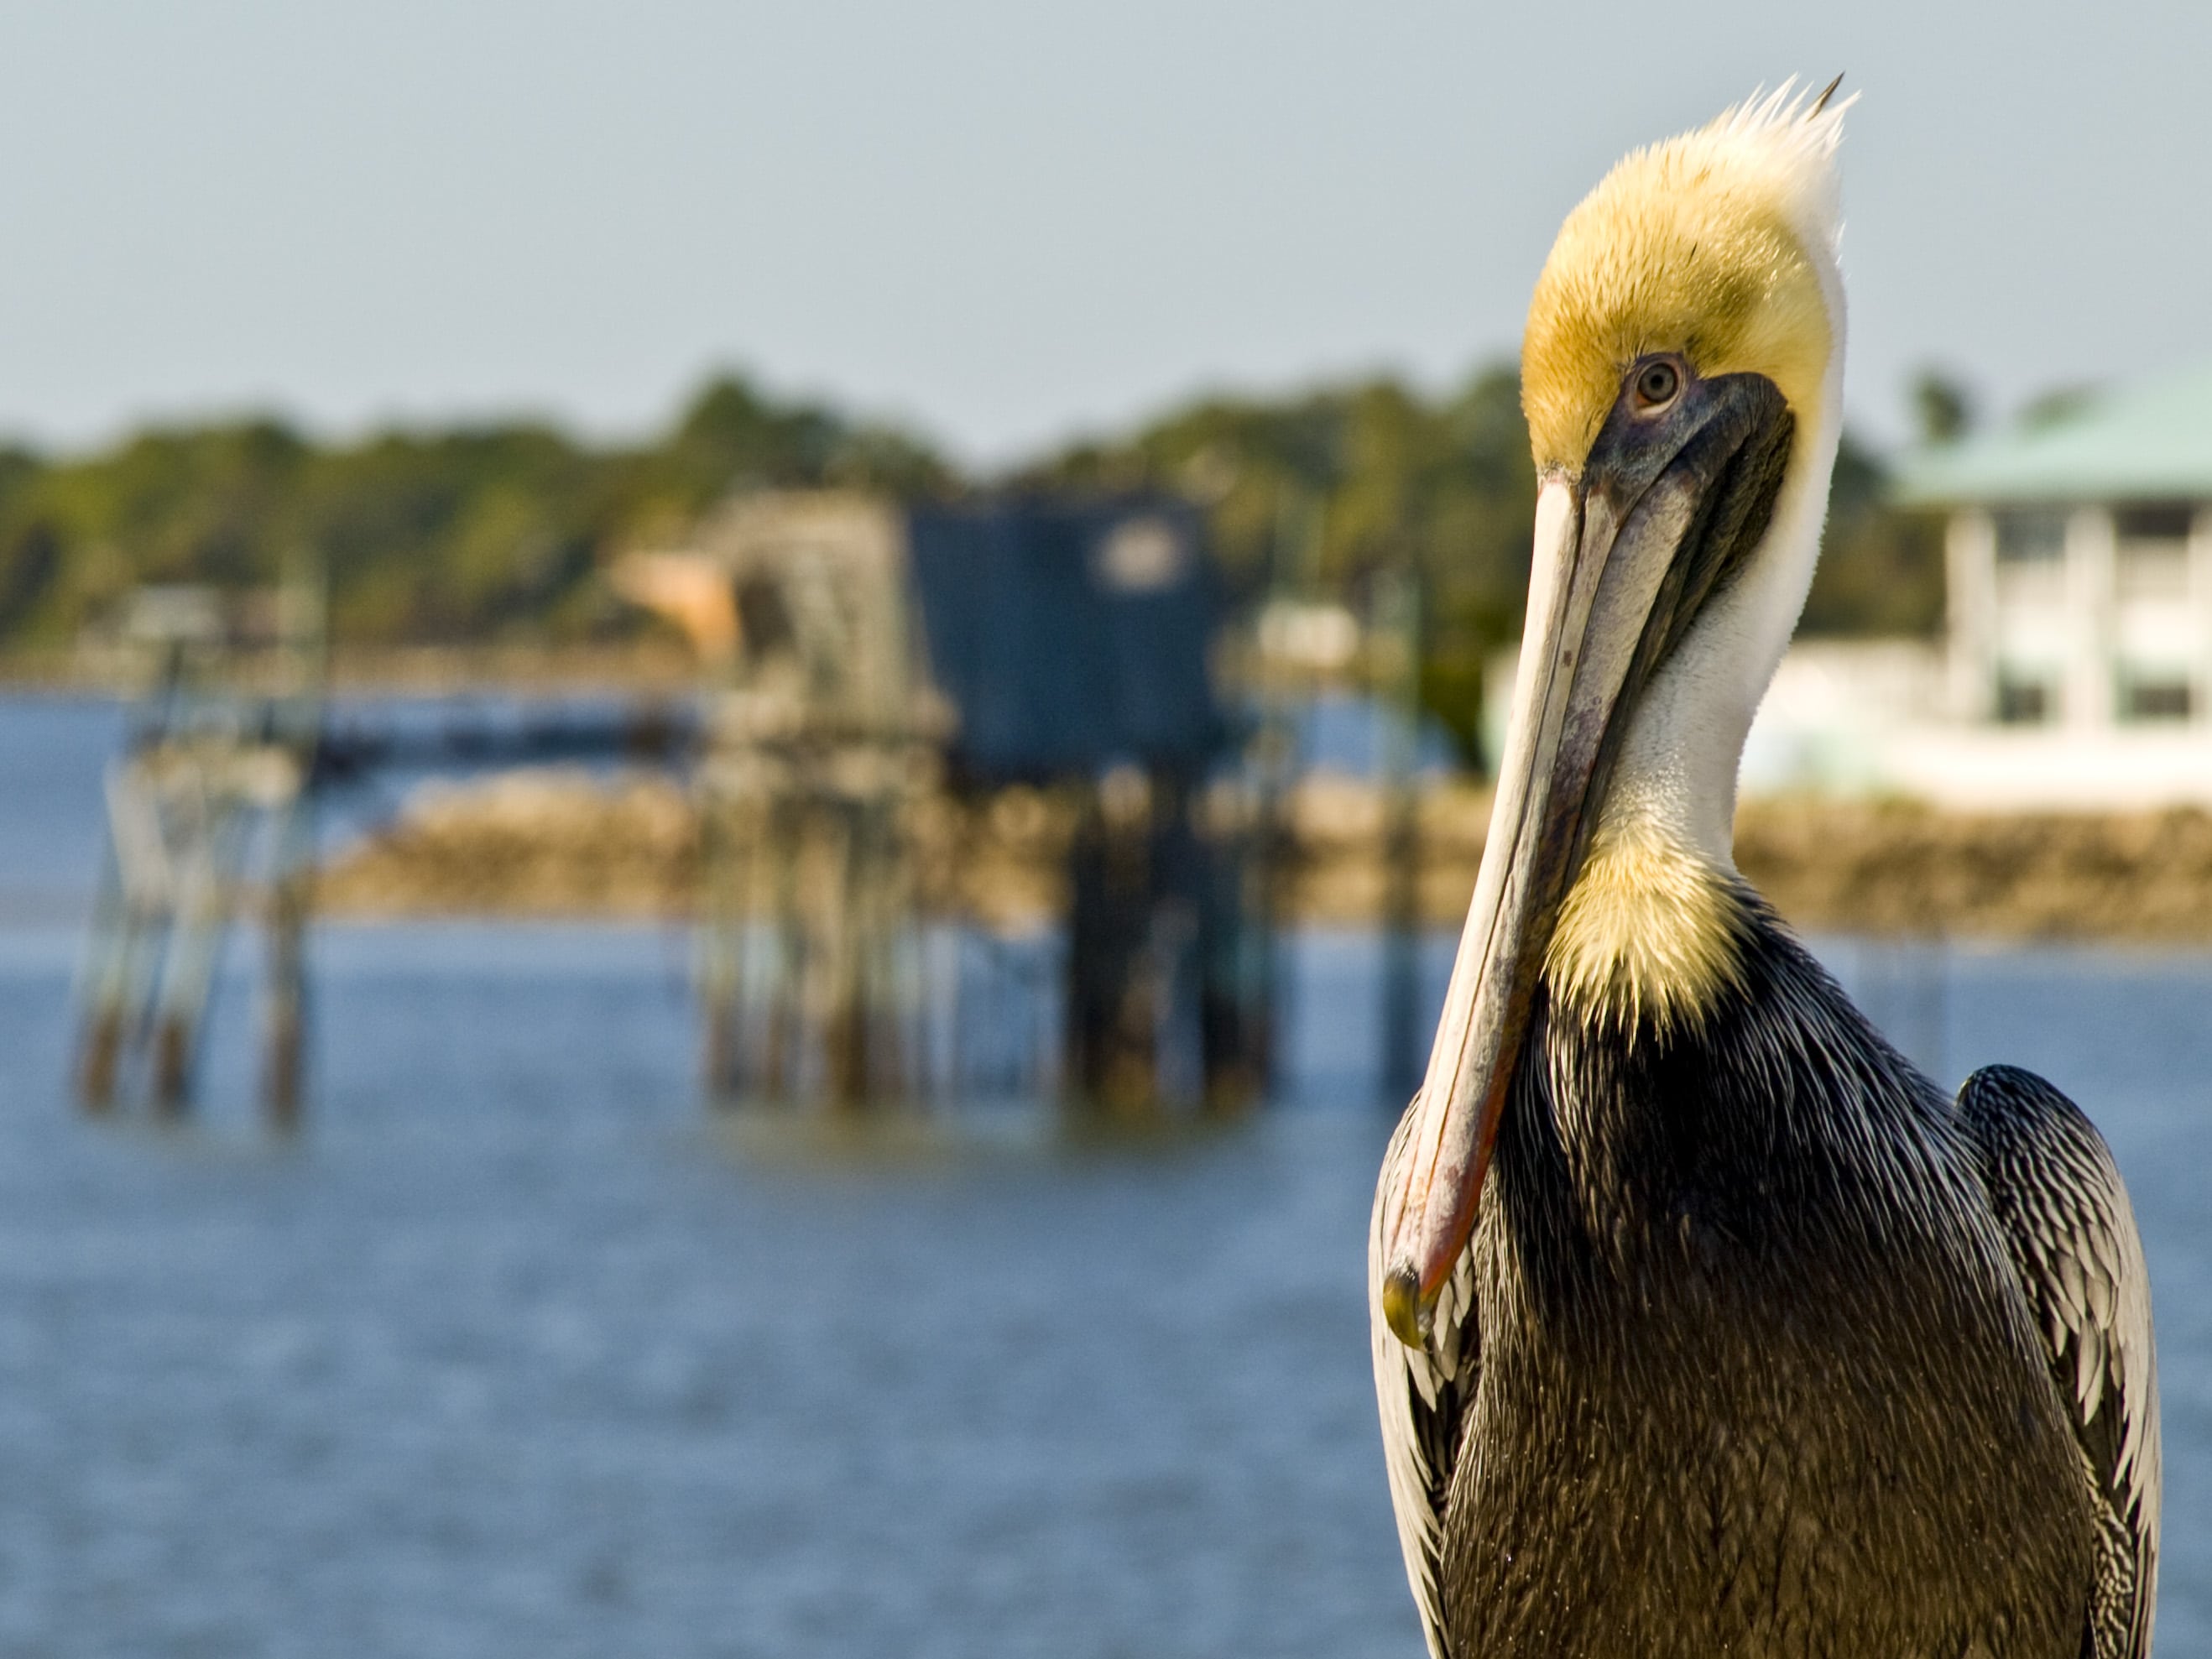 A pelican looking wryly at camera with dockscape in background.